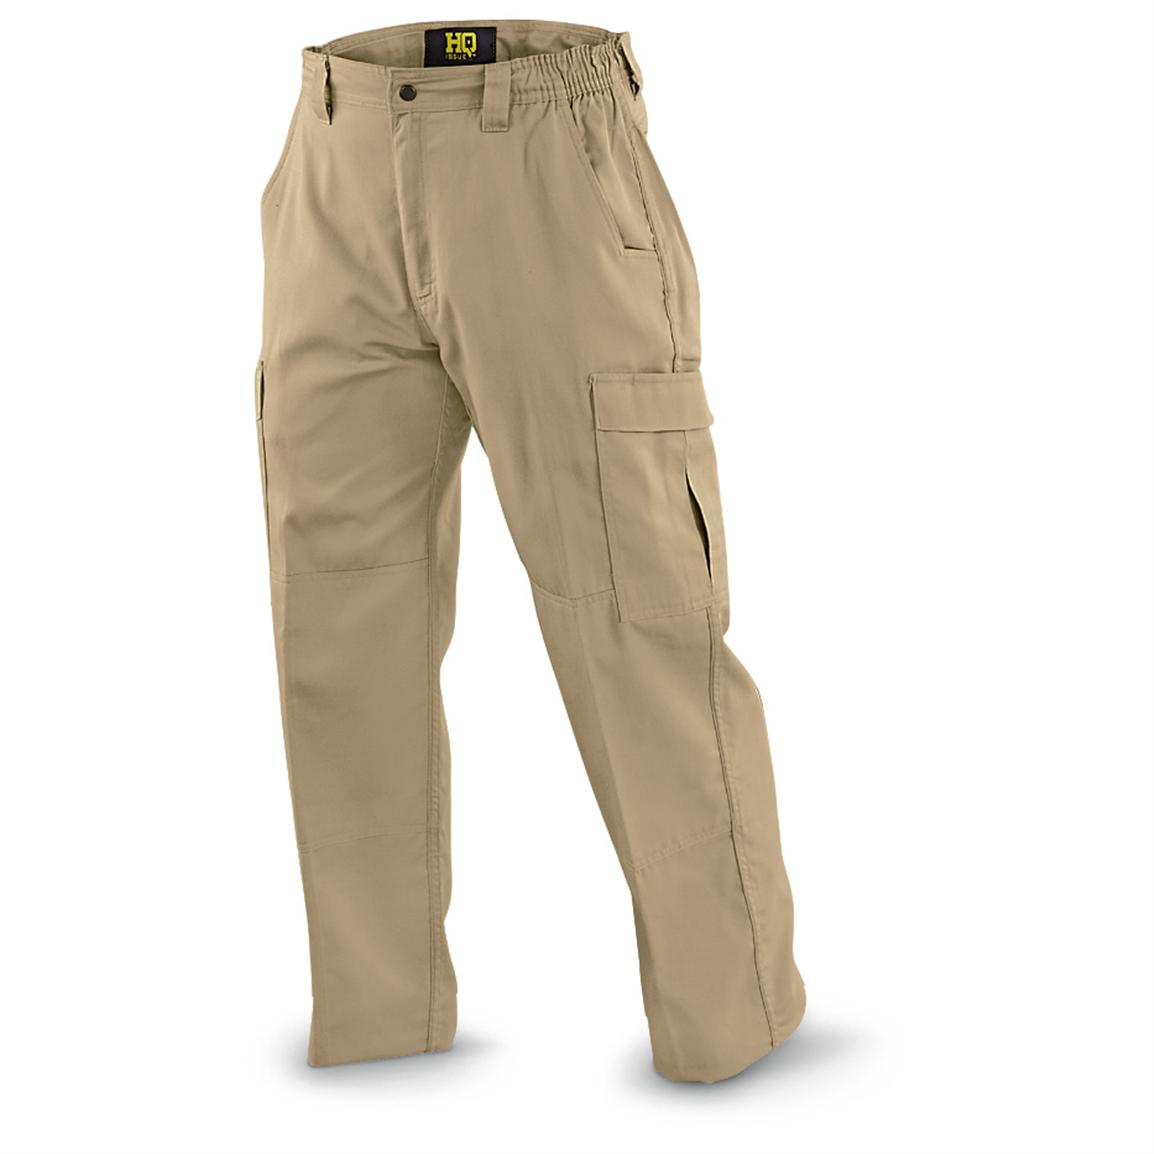 HQ ISSUE™ Tactical Cargo Pants, Khaki - 294870, Tactical Clothing ...